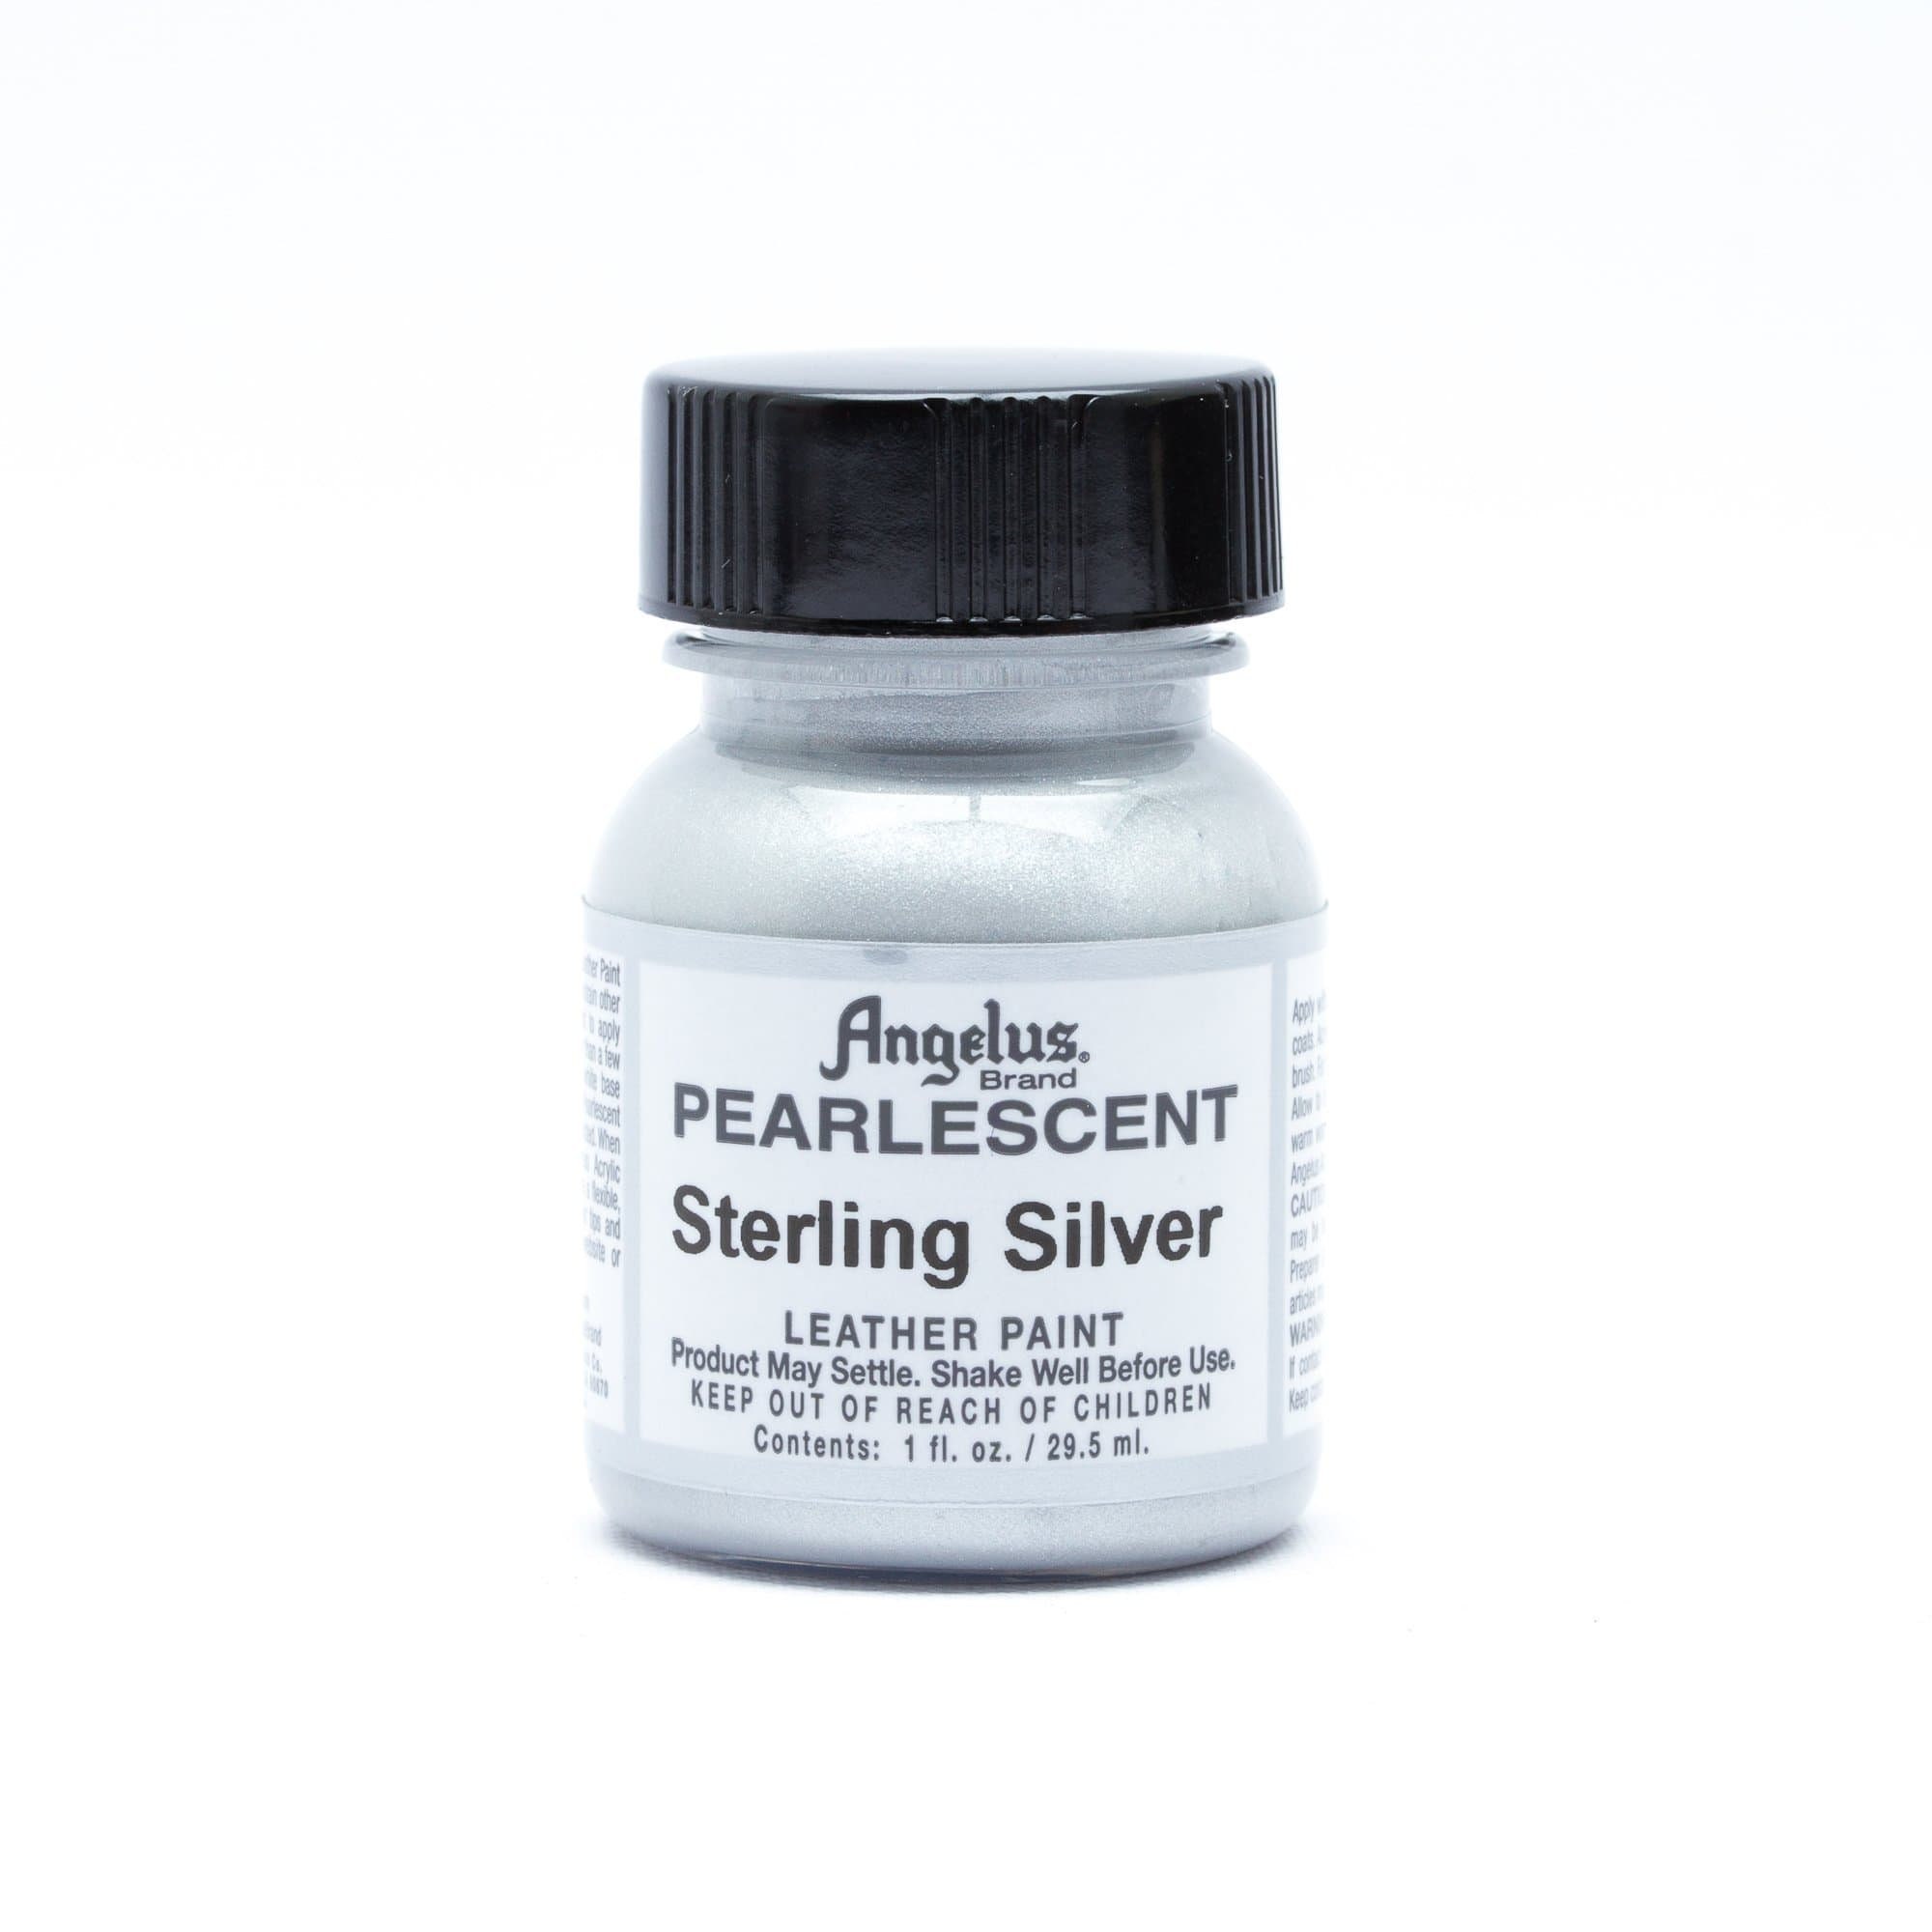 Angelus Pearlescent Paint Sterling Silver / 1oz and 4oz Bottles / Metallic  Leather Paint 